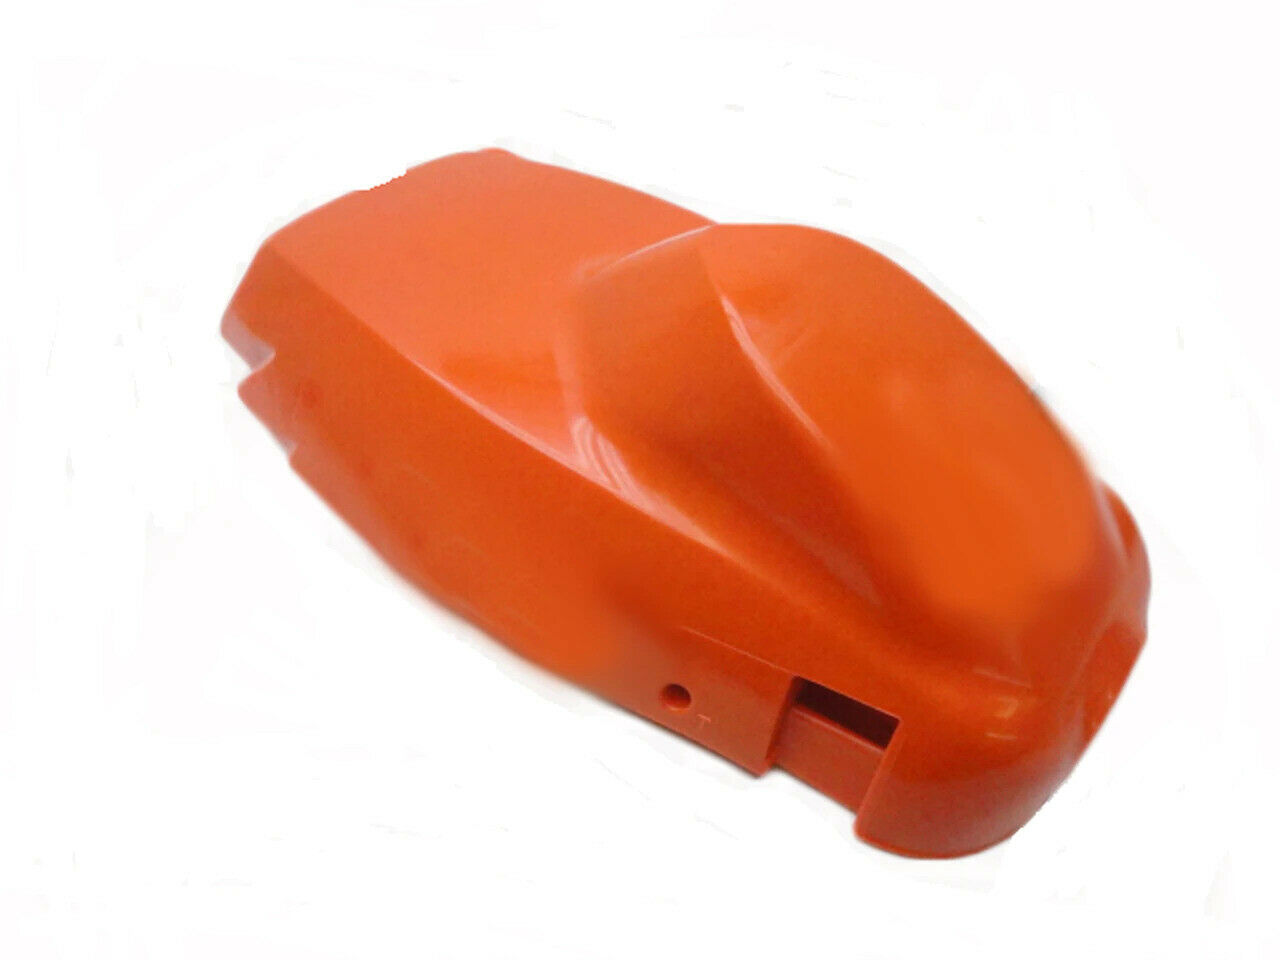 Primary image for A160003220 OEM NEW ECHO CS-310 Chainsaw ENGINE CYLINDER COVER top shroud